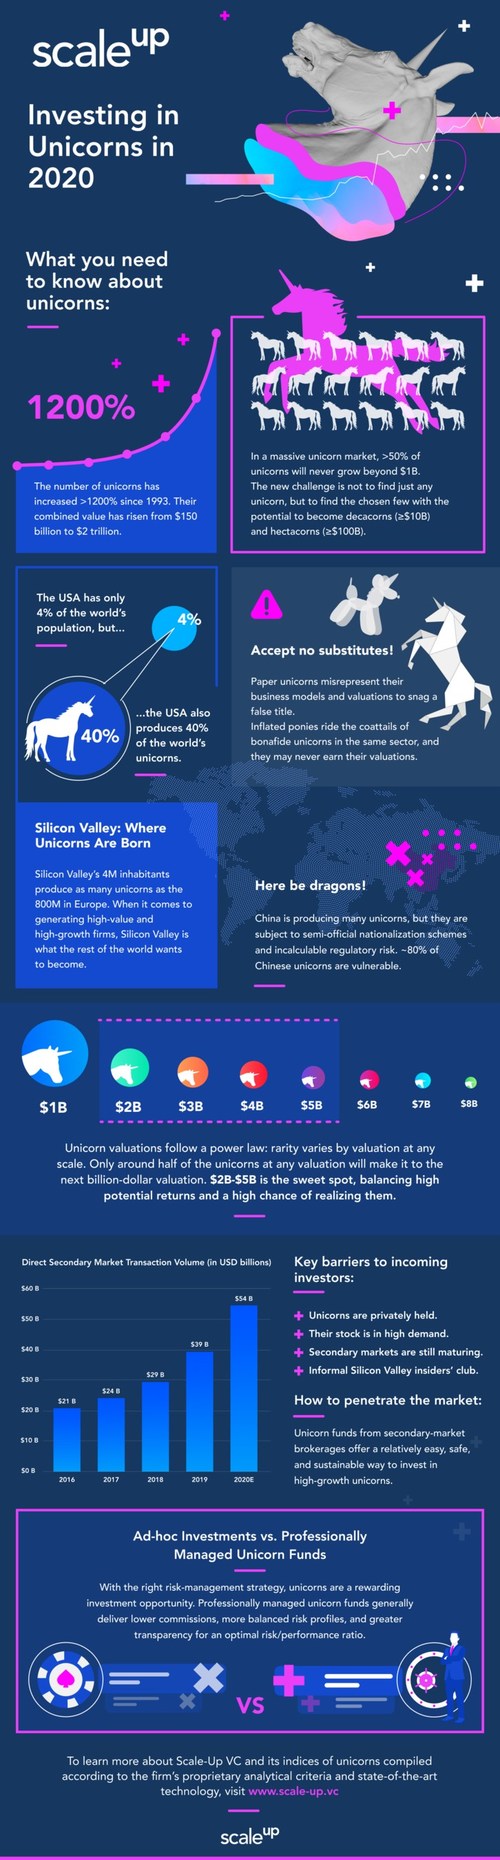 Scale-Up Investing in Unicorns in 2020 Infographic